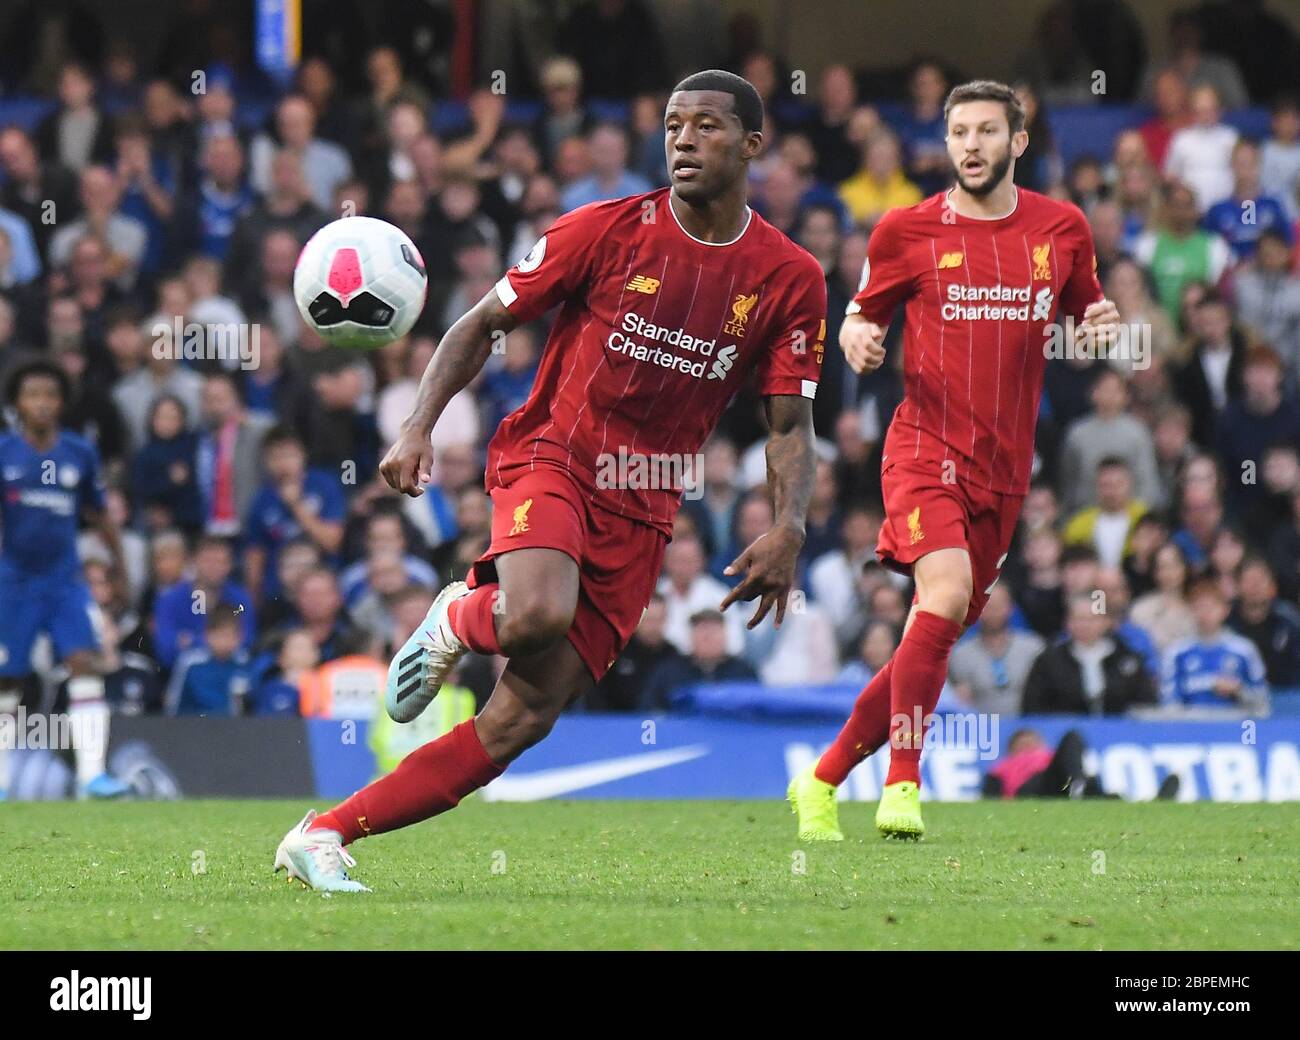 LONDON, ENGLAND - SEPTEMBER 22, 2019: Georginio Wijnaldum of Liverpool pictured during the 2019/20 Premier League game between Chelsea FC and Liverpool FC at Stamford Bridge. Stock Photo